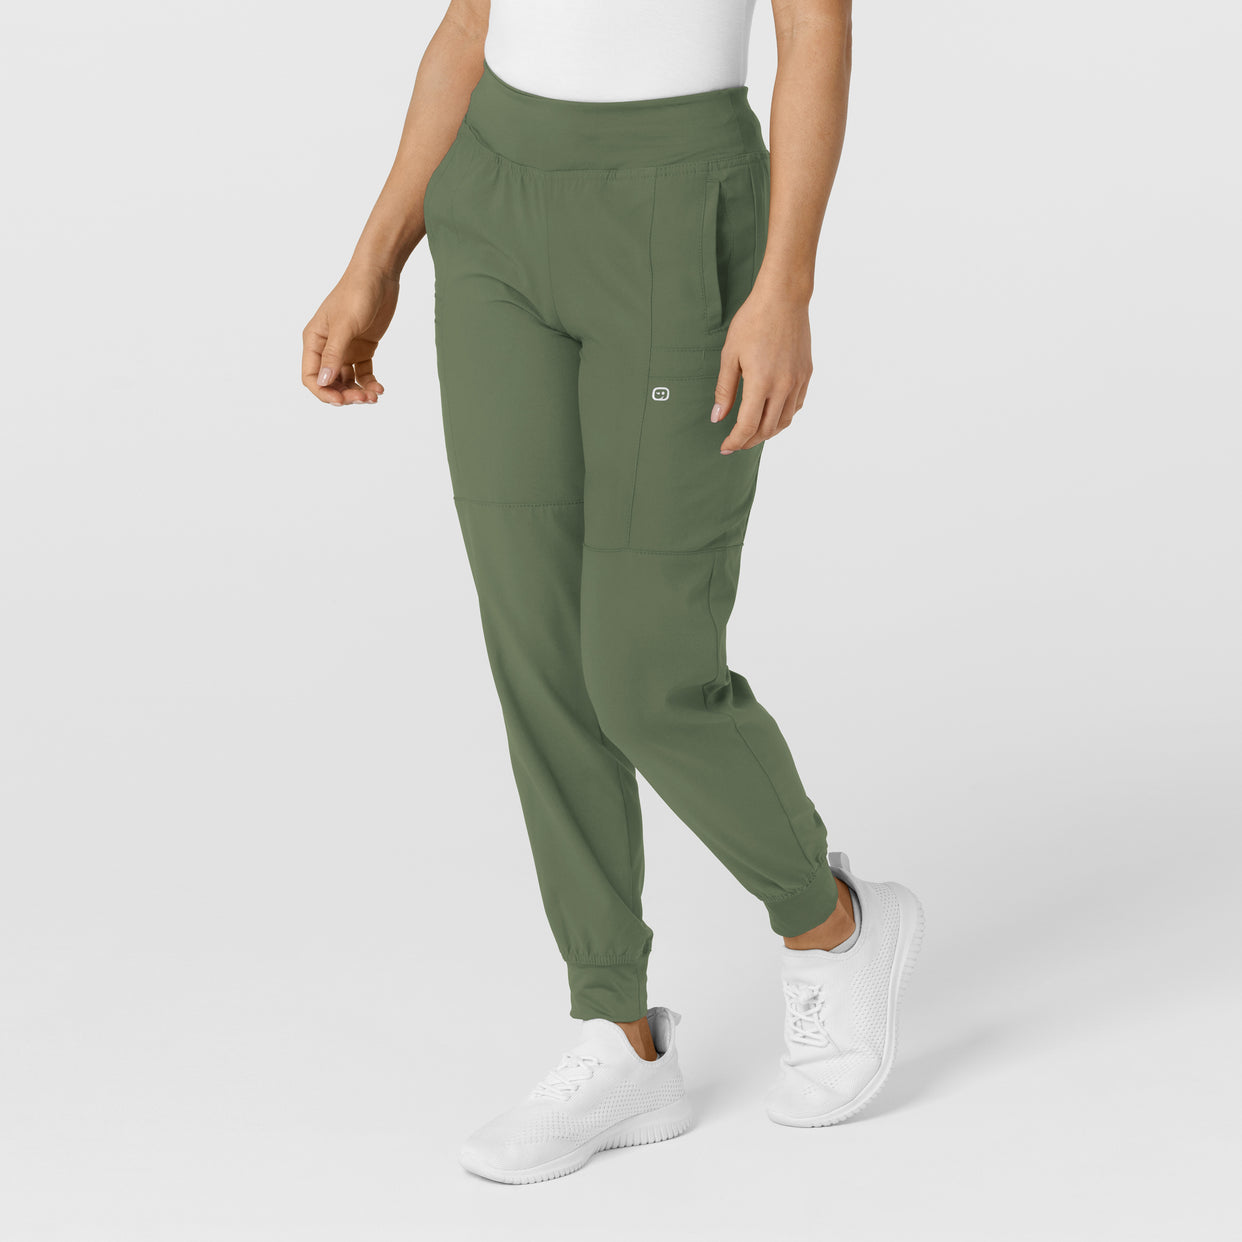 W123 Women's Comfort Waist Cargo Jogger Scrub Pant Olive side view